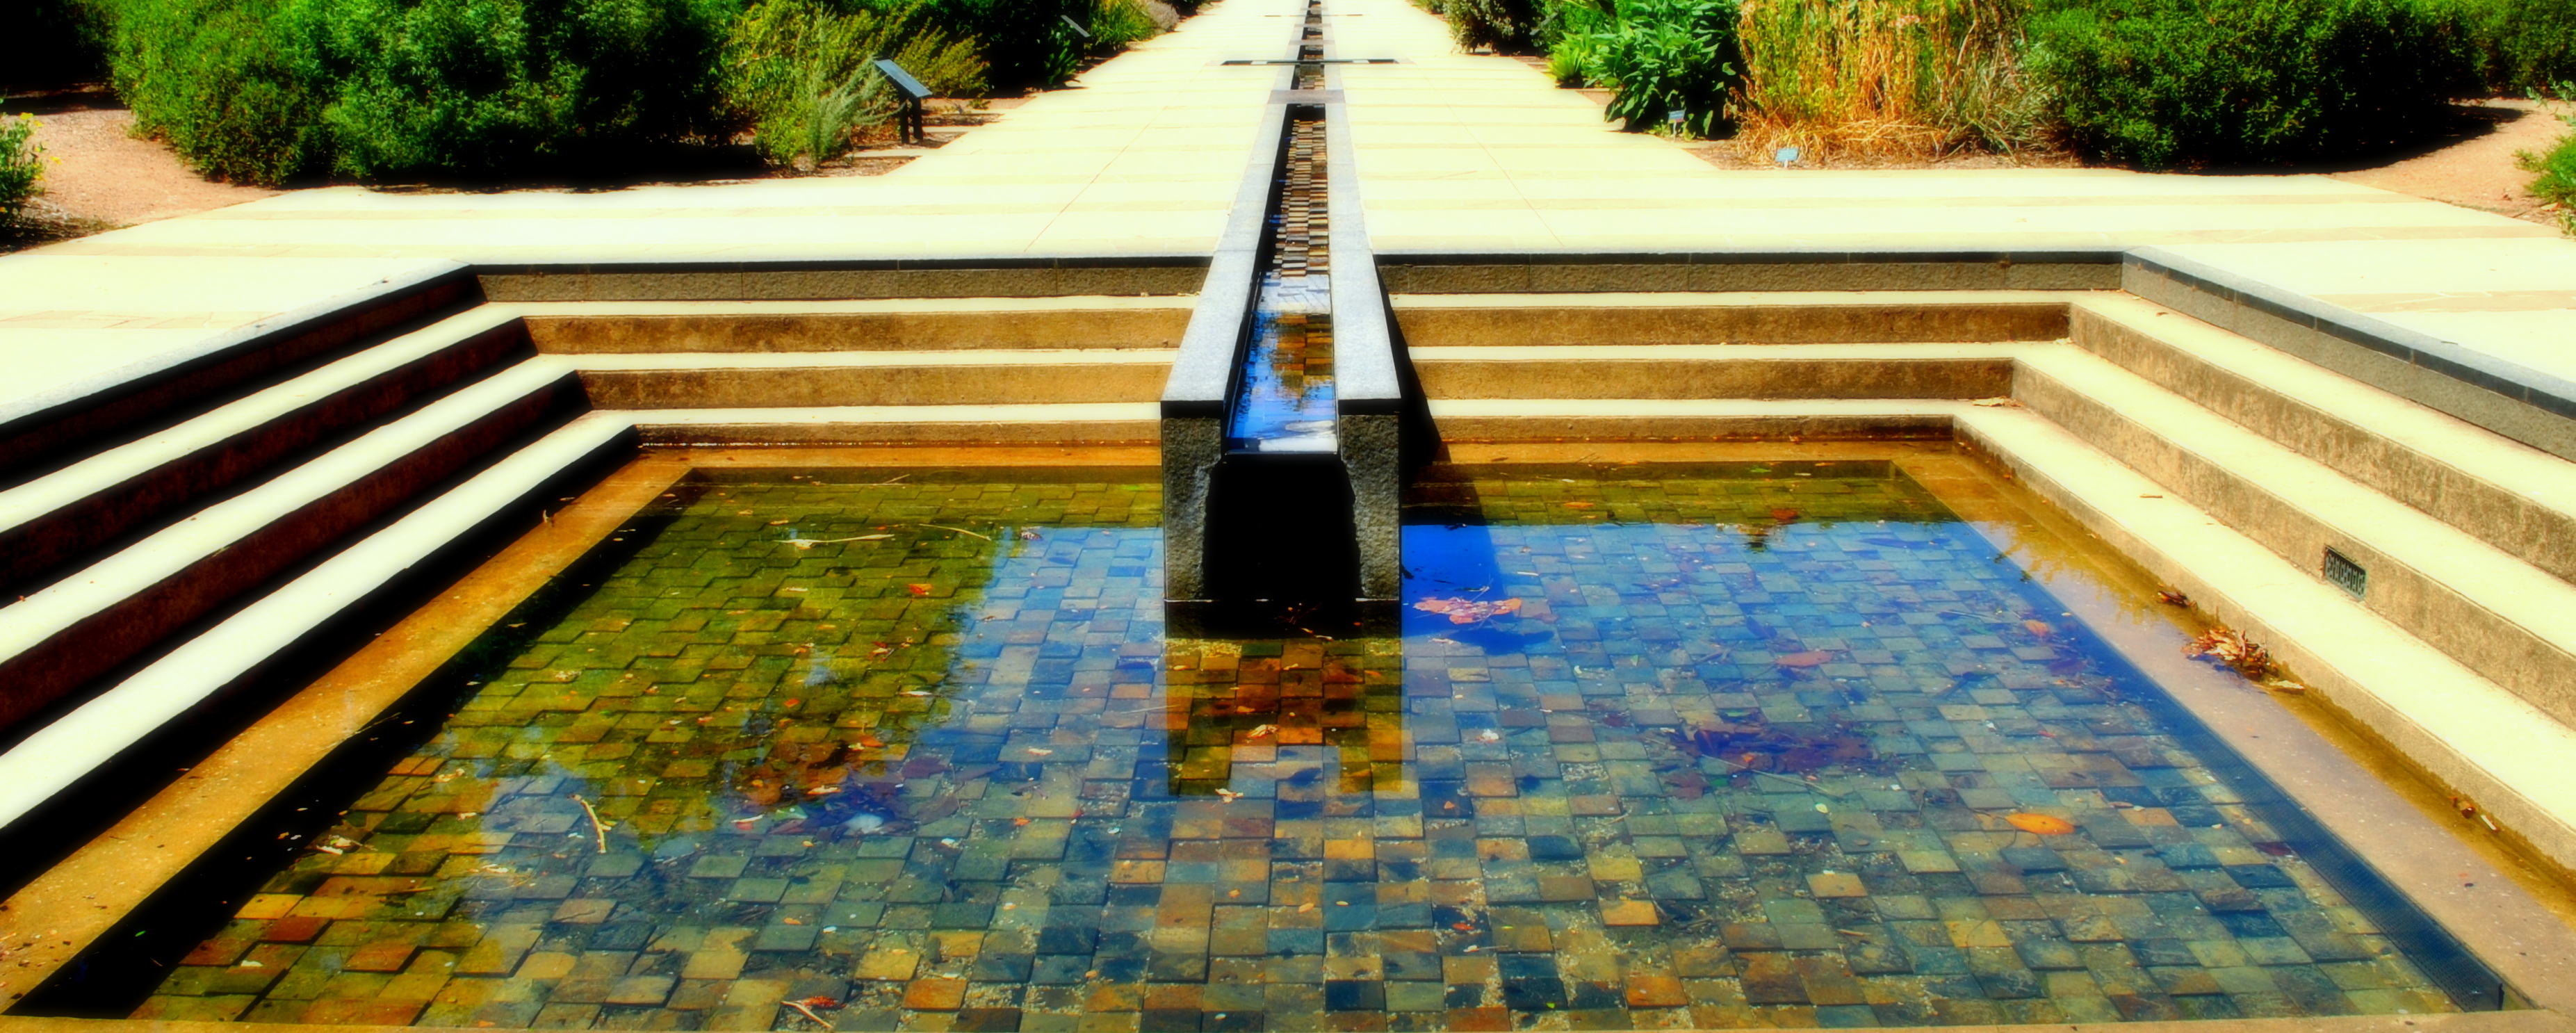 Water Pool, Architecture, Construction, Flow, Nature, HQ Photo